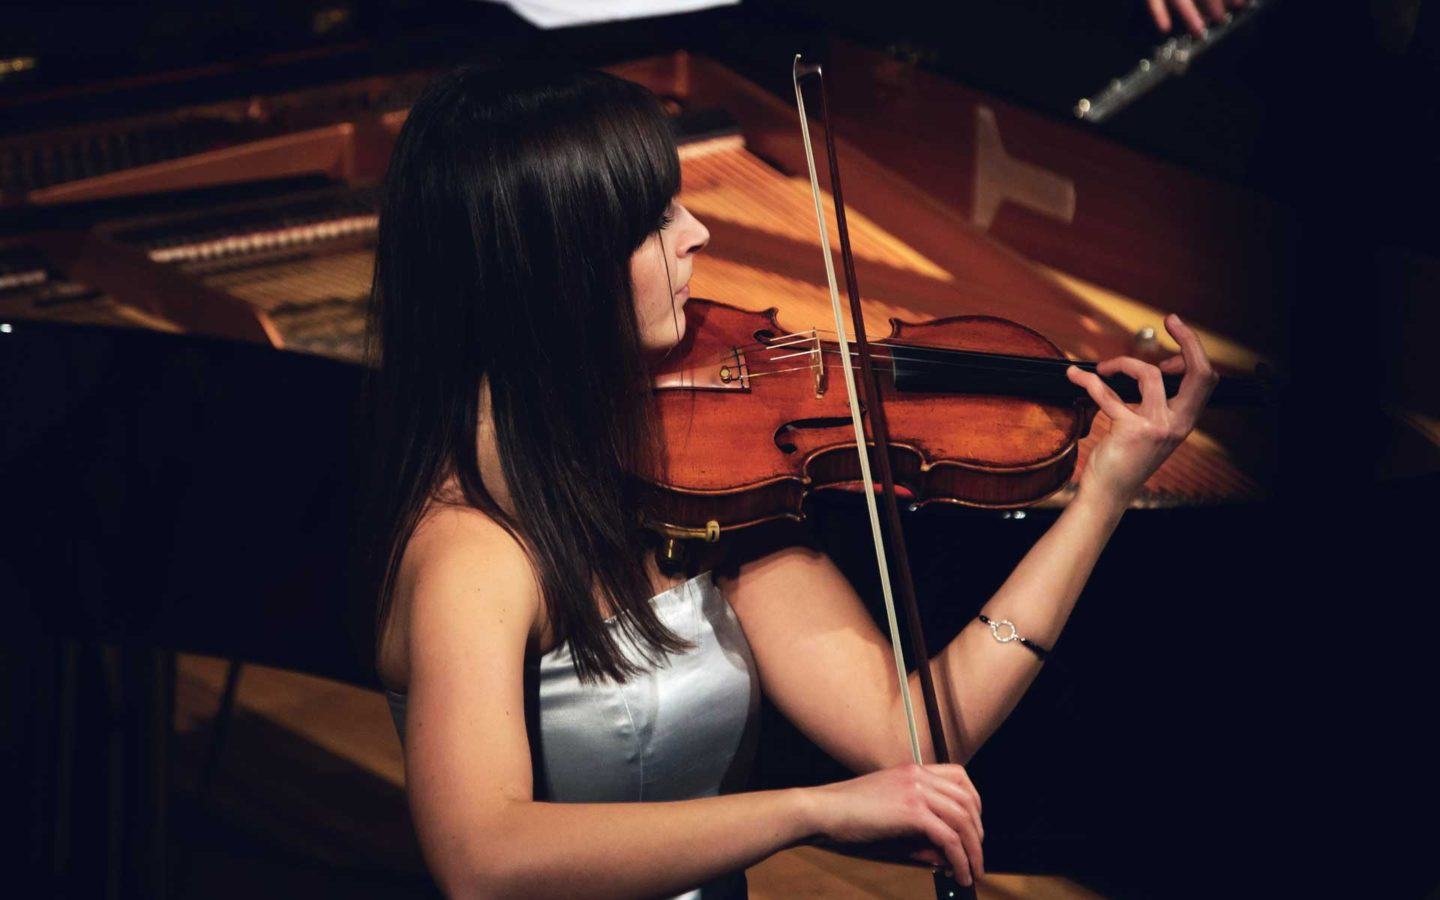 young woman in grey dress playing the violin in front of piano